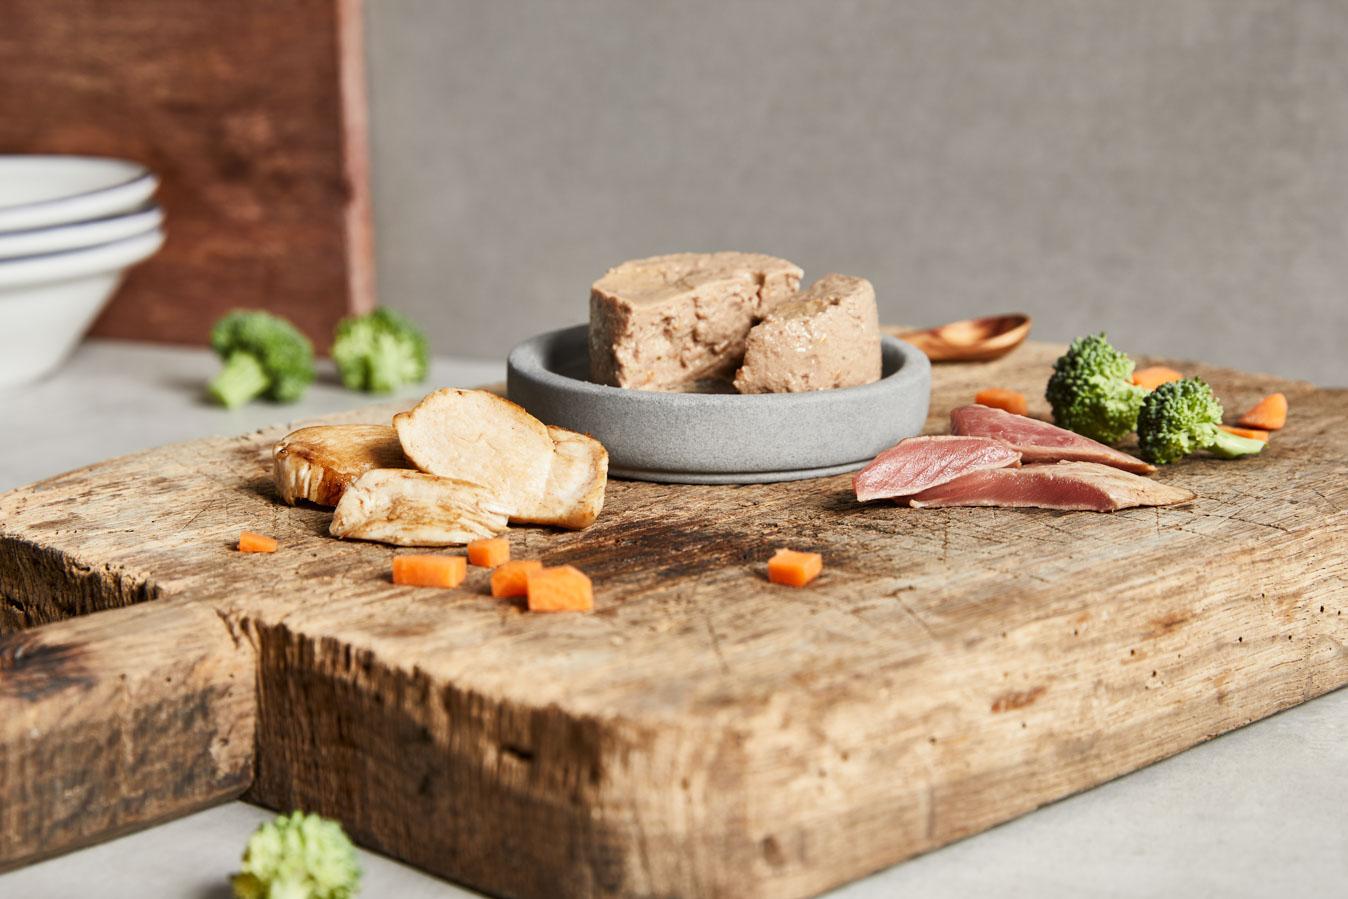 Farmers Market Meat Centre - Chicken Mousse with shredded Tuna Centre, Pumpkin & Broccoli 80g